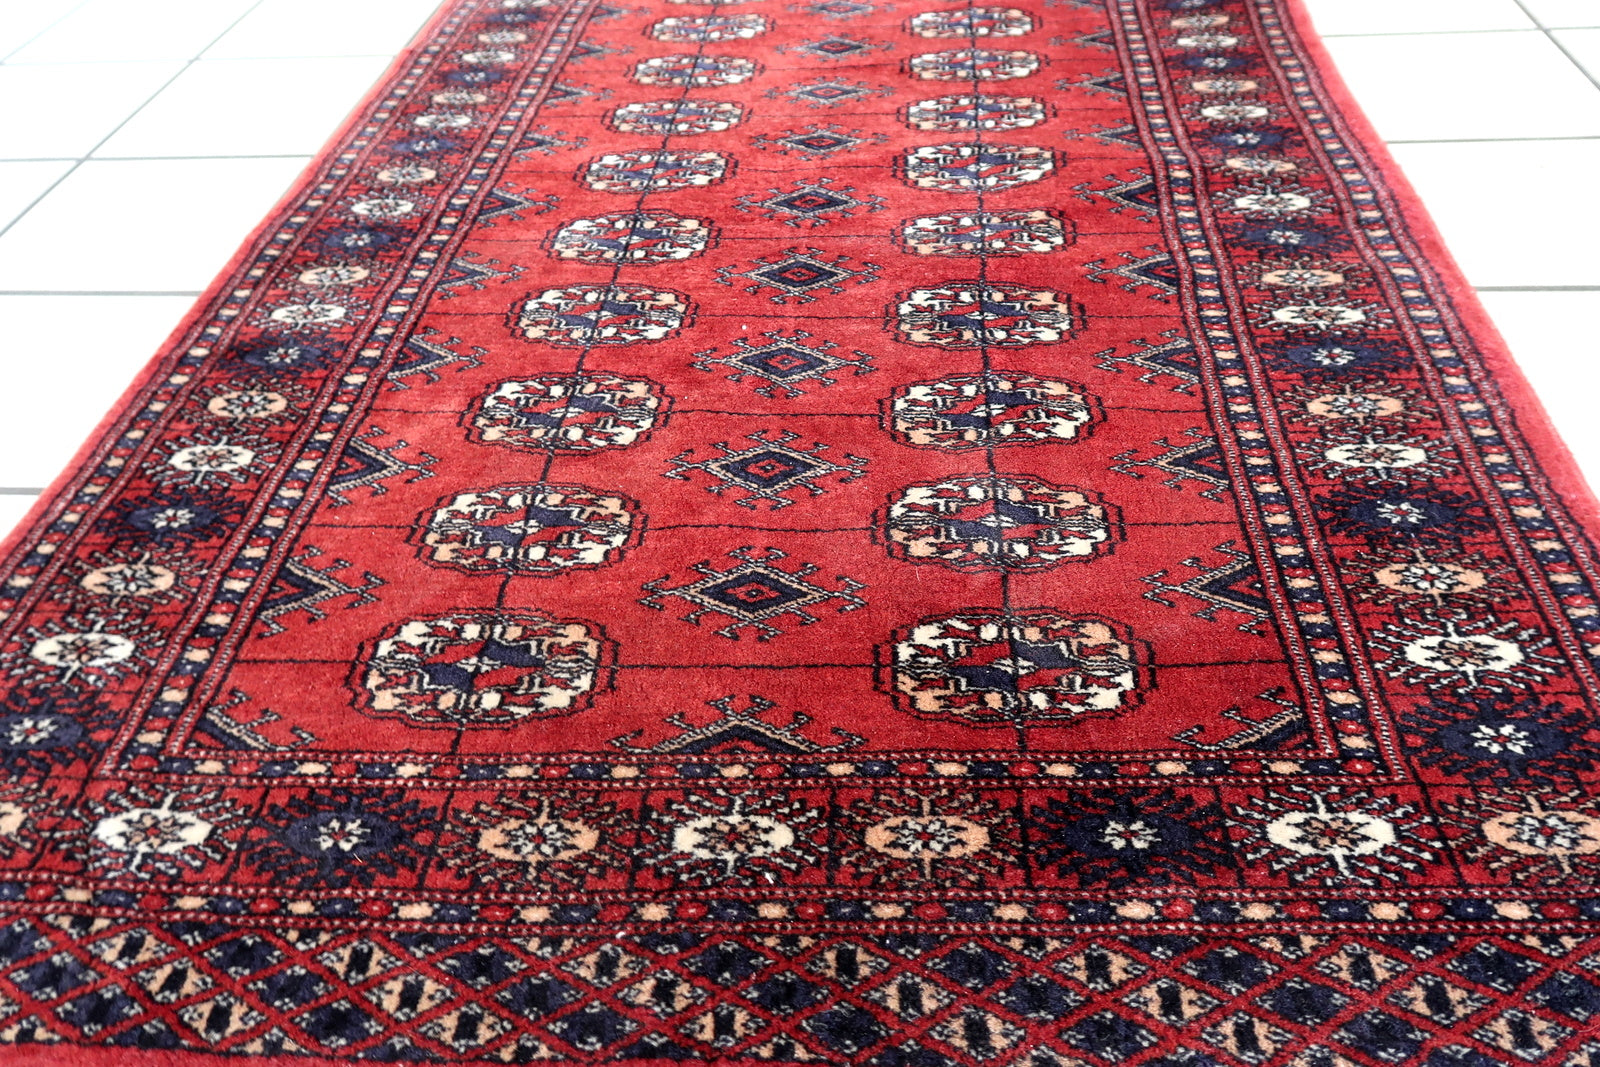 Handmade vintage red rug in Bukhara design. The rug is in original good condition, from the end of 20th century.